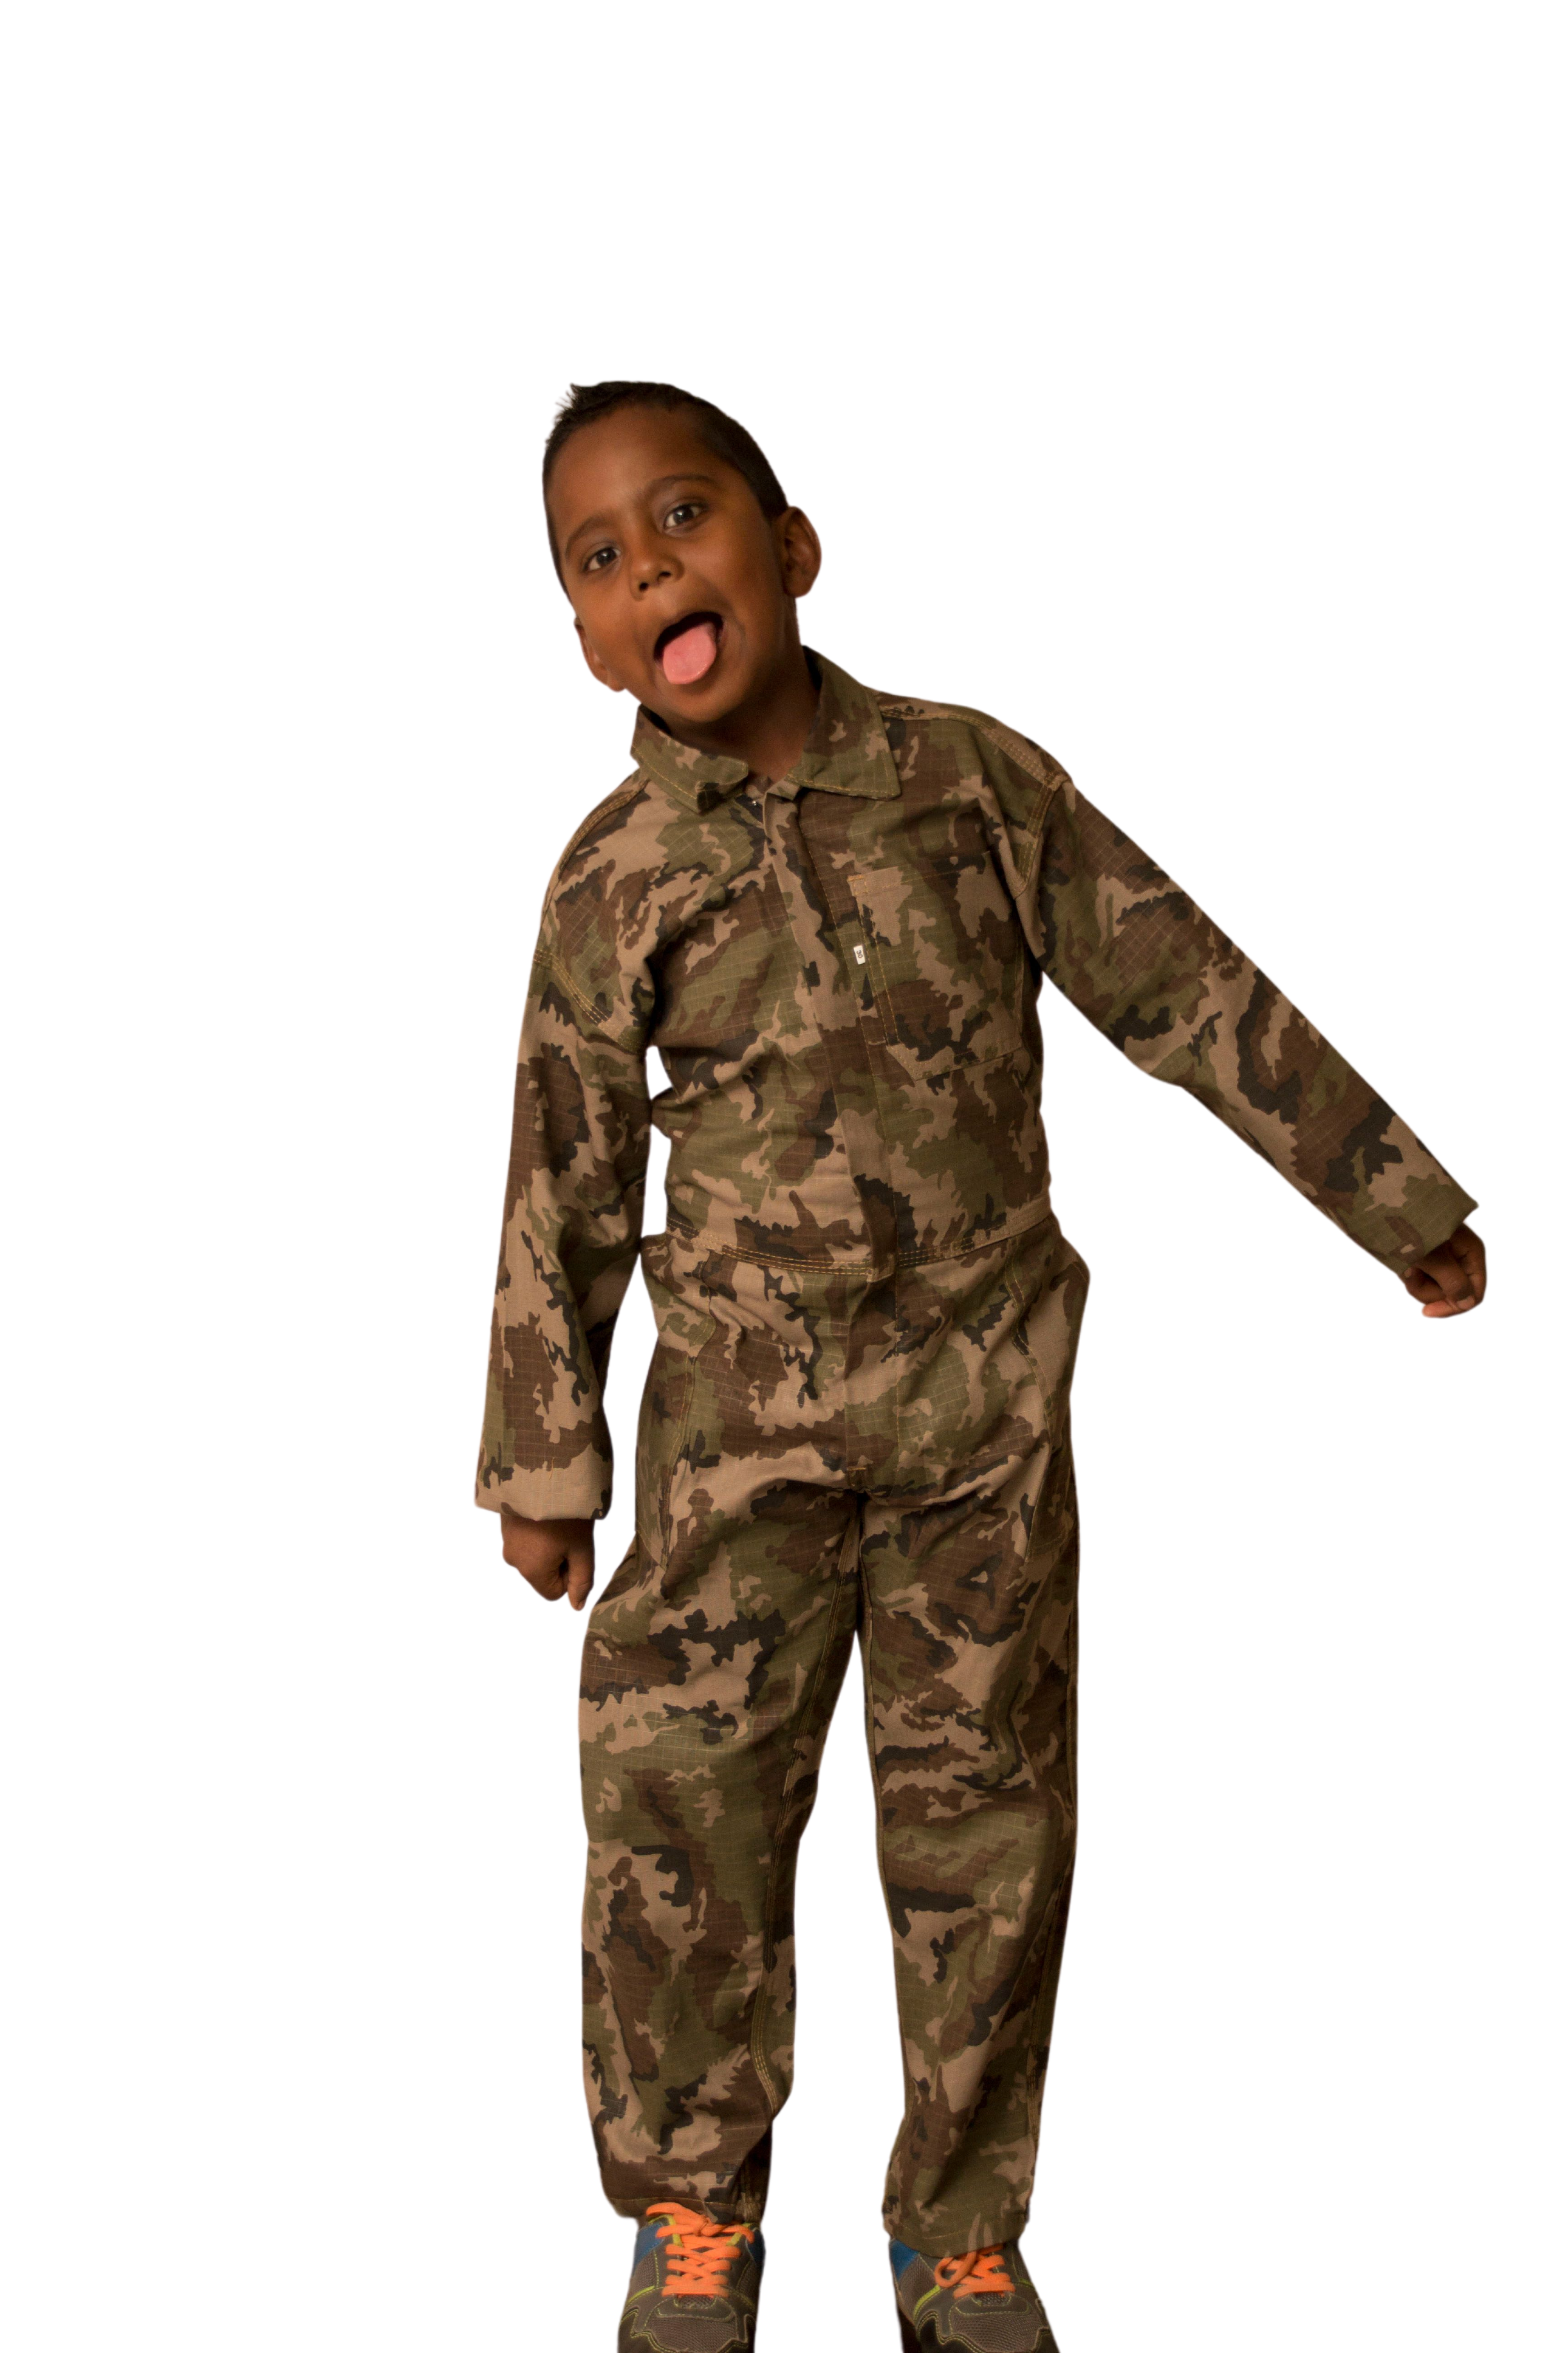 Kids Camo Overalls/Play Suits: Durable, Comfortable, and Stylish Attire for Outdoor Exploration and Playtime Fun - 4-5years